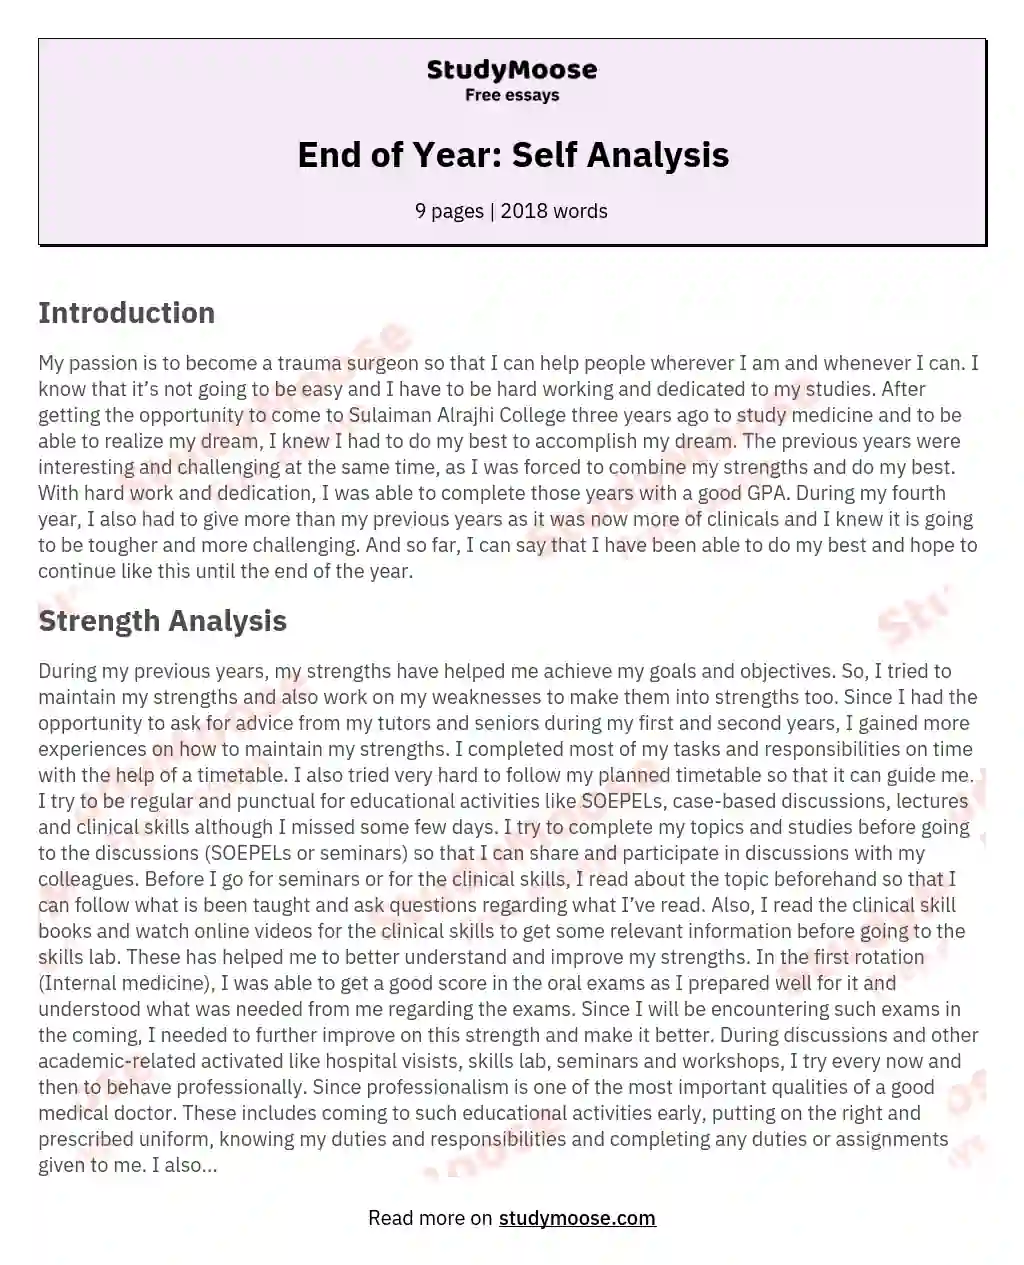 End of Year: Self Analysis essay